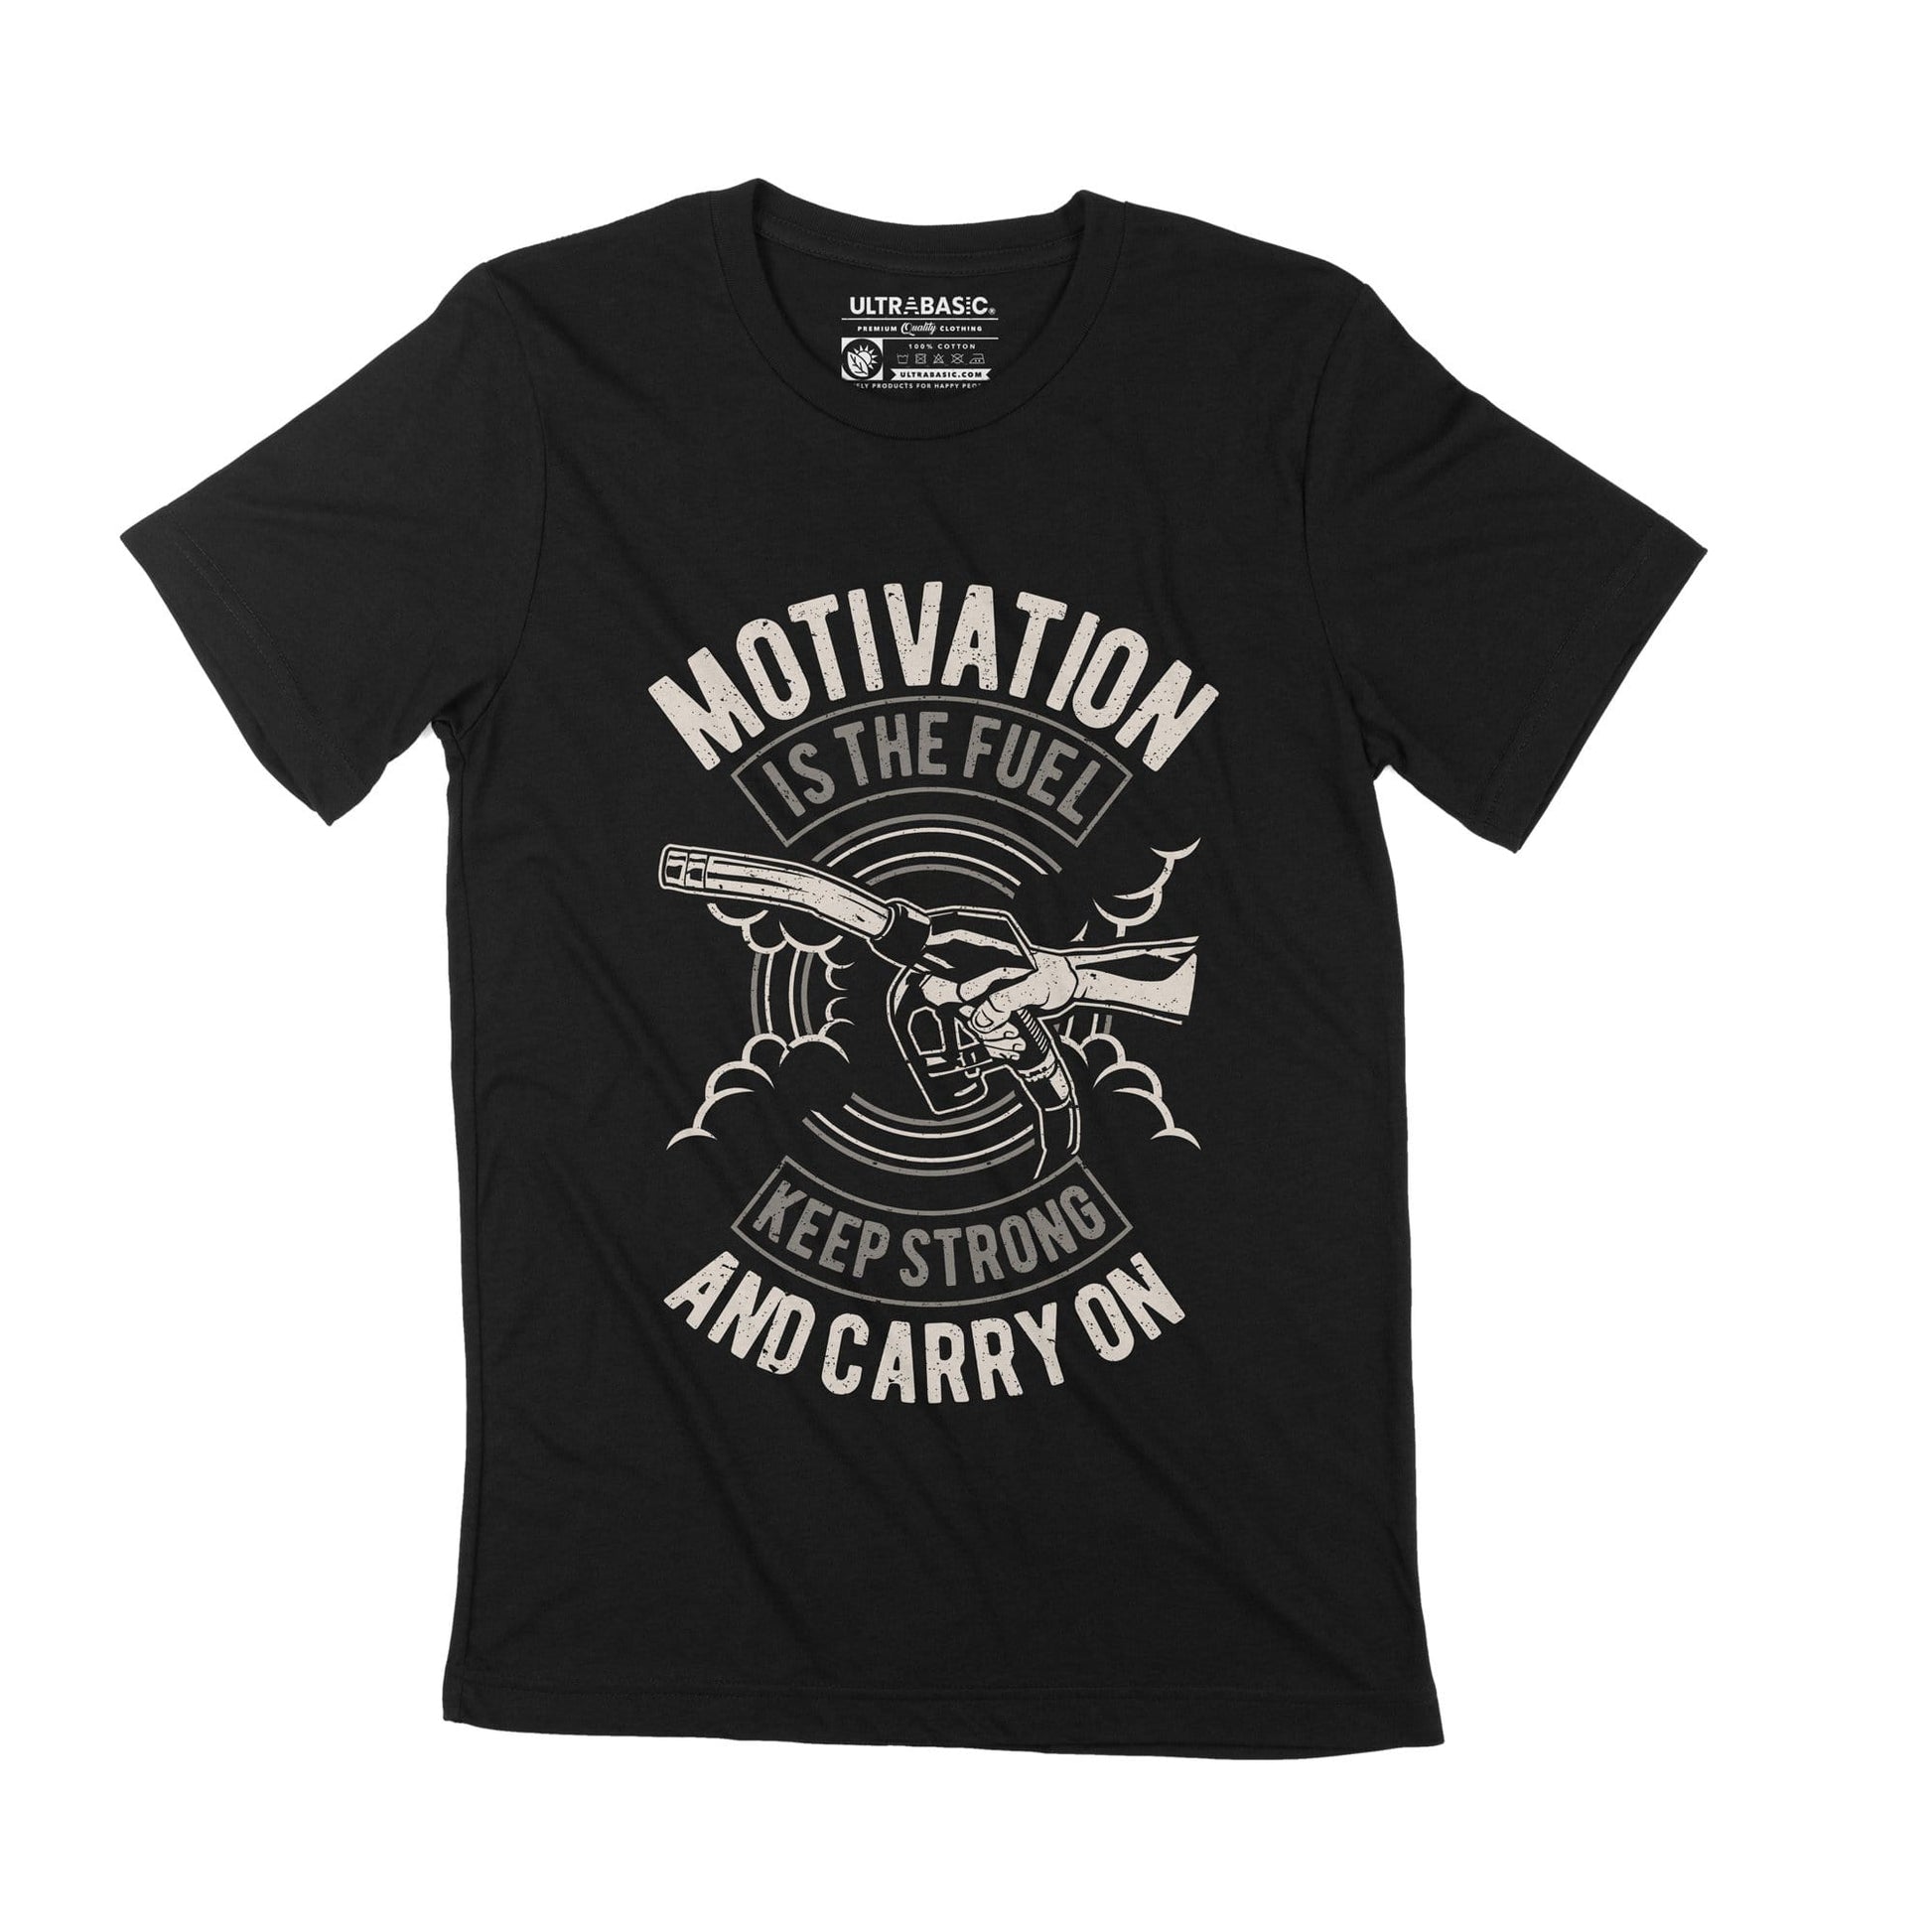 ULTRABASIC Men's T-Shirt Motivation is The Fuel - Inspiring Motivational Quote Tee  sport gym workout  inspirational saying adult dad apparel print tees funny youth ideas merch present fathers day merchandise letter clothing christmas unisex classic teens casual print outdoor kind motivation slogan positive vibes nerd retro